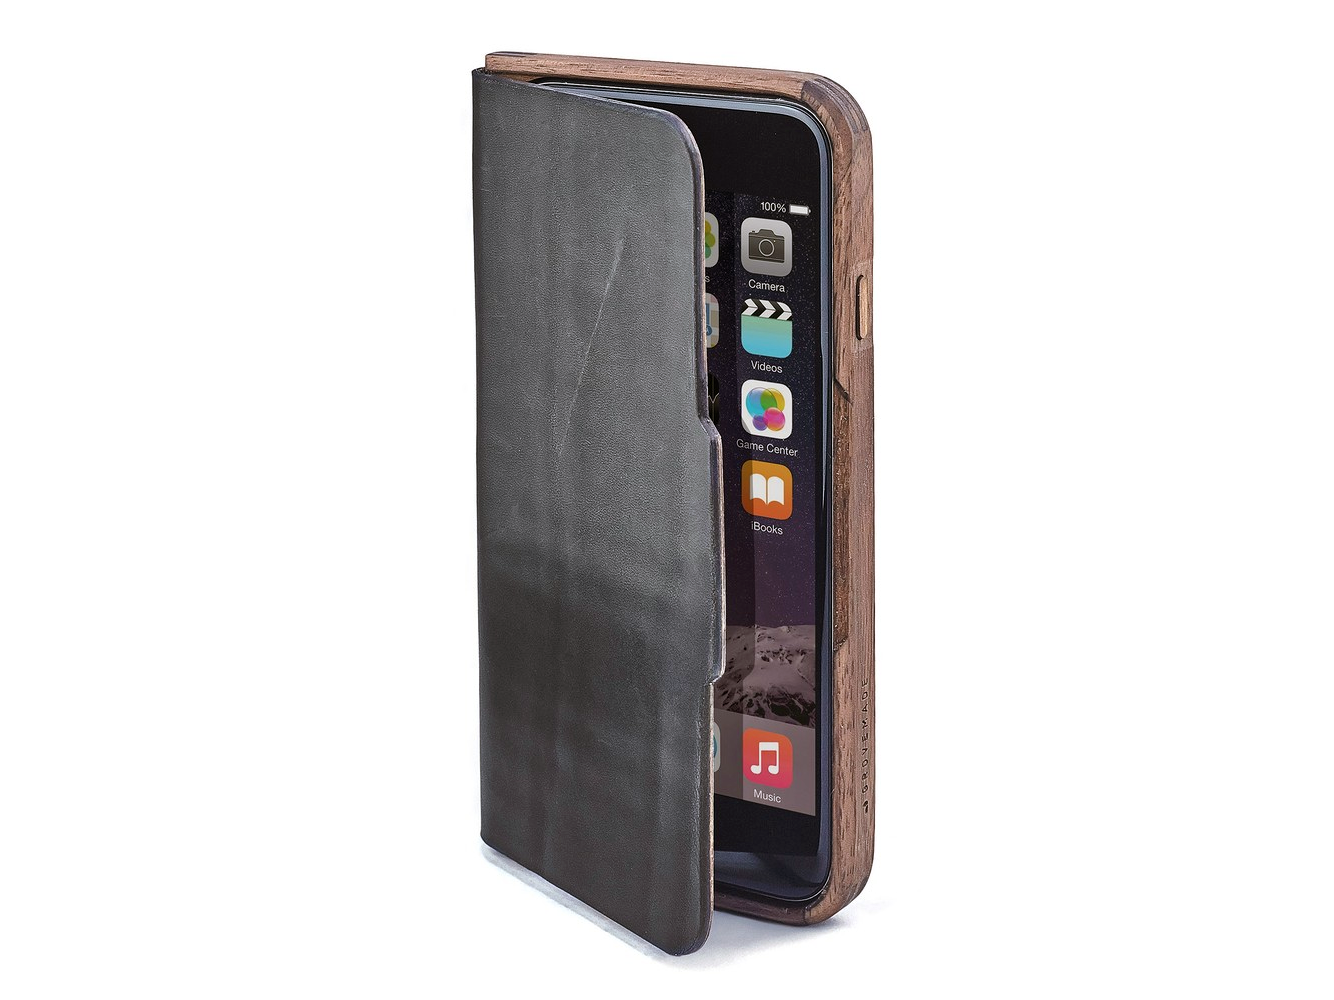 GROVEMADE WALNUT AND LEATHER CASE (US$130)